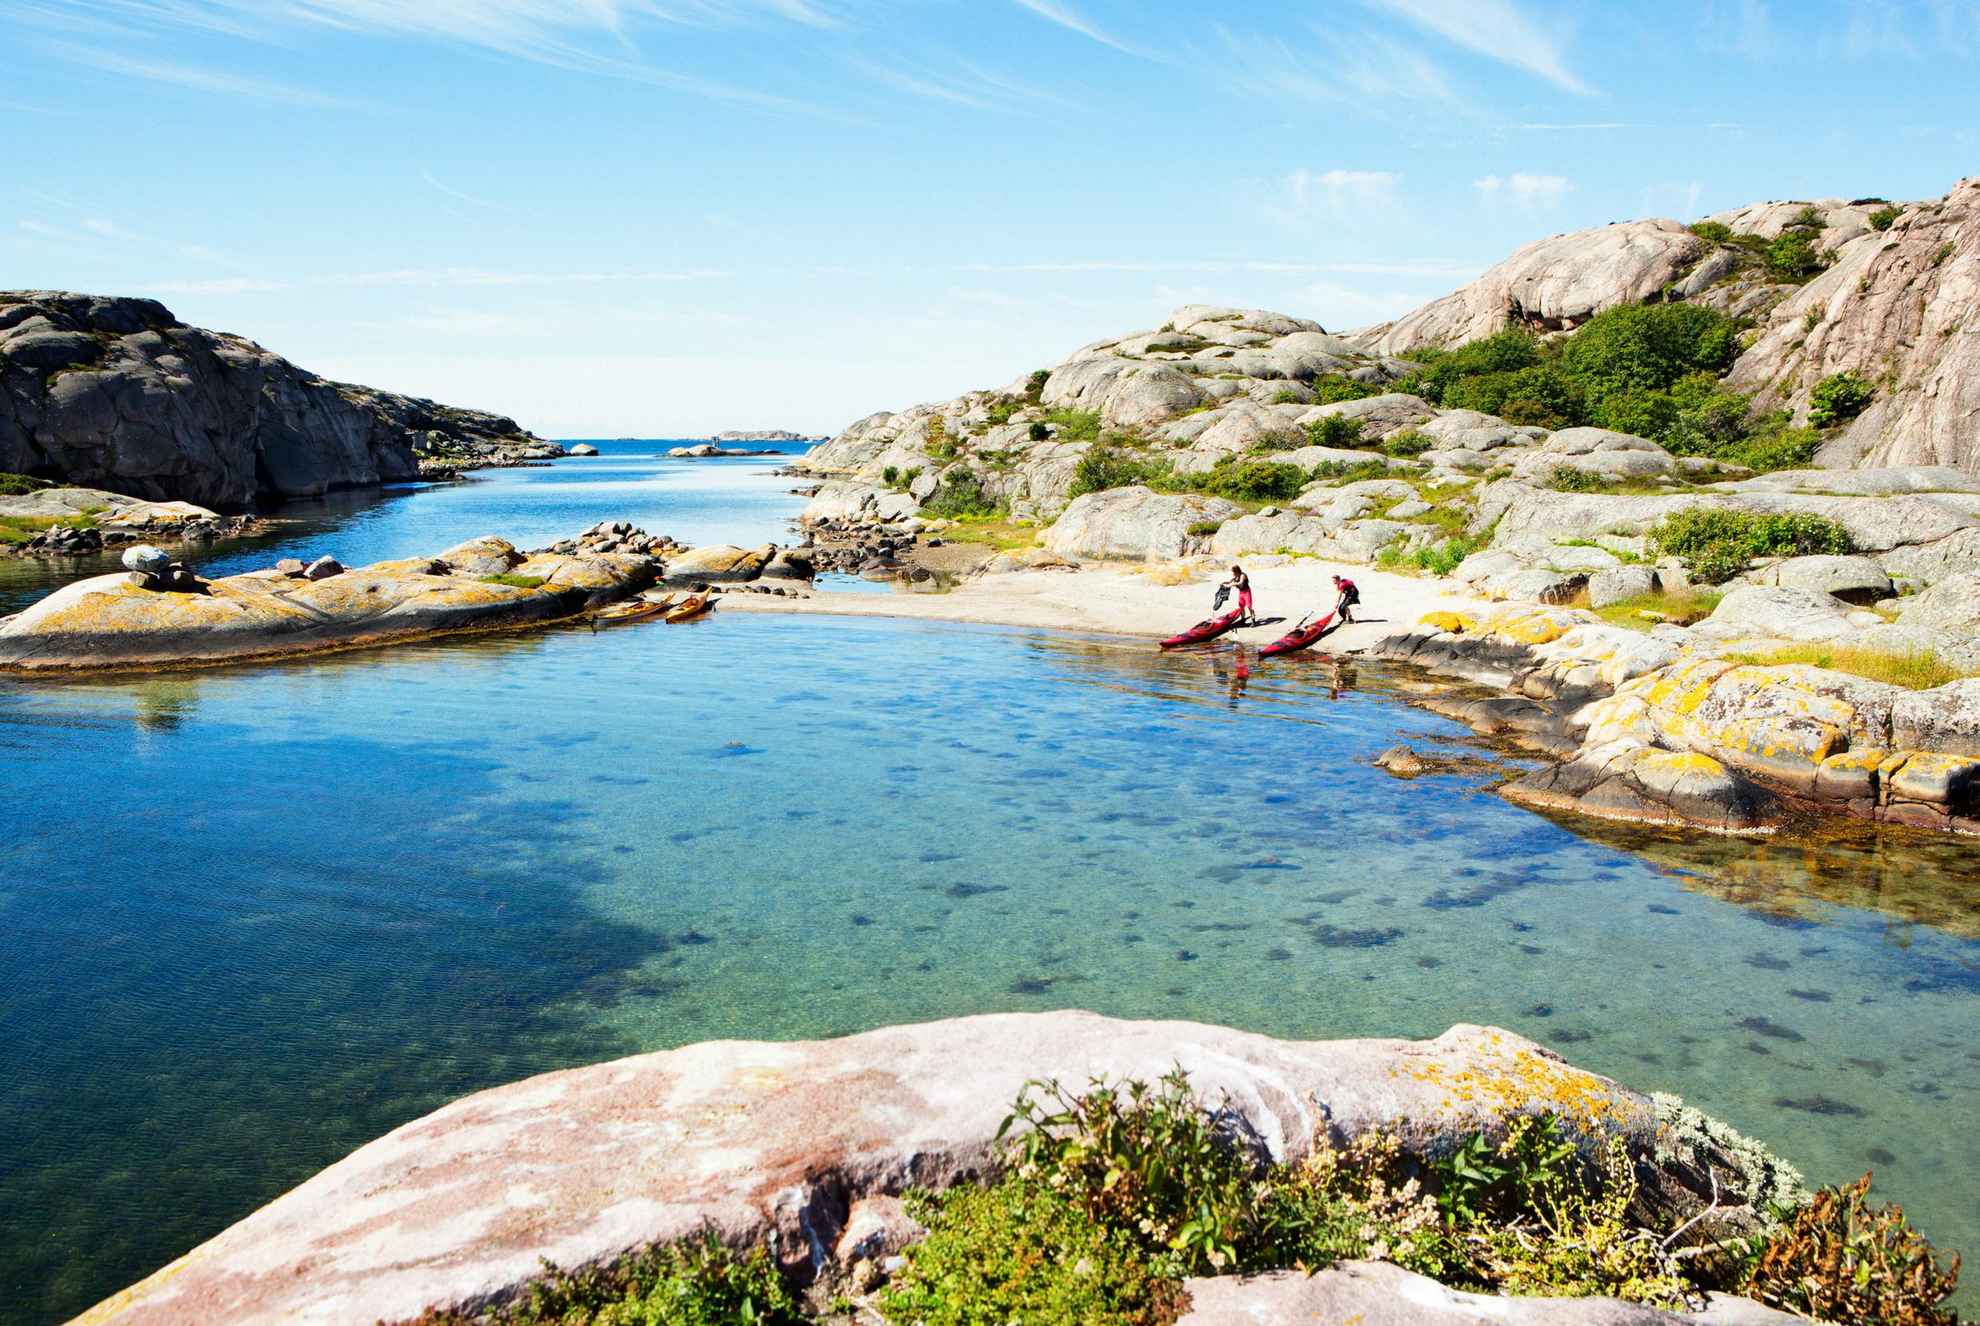 Two people standing next to their kayaks on a beach in the archipelago during a sunny day.